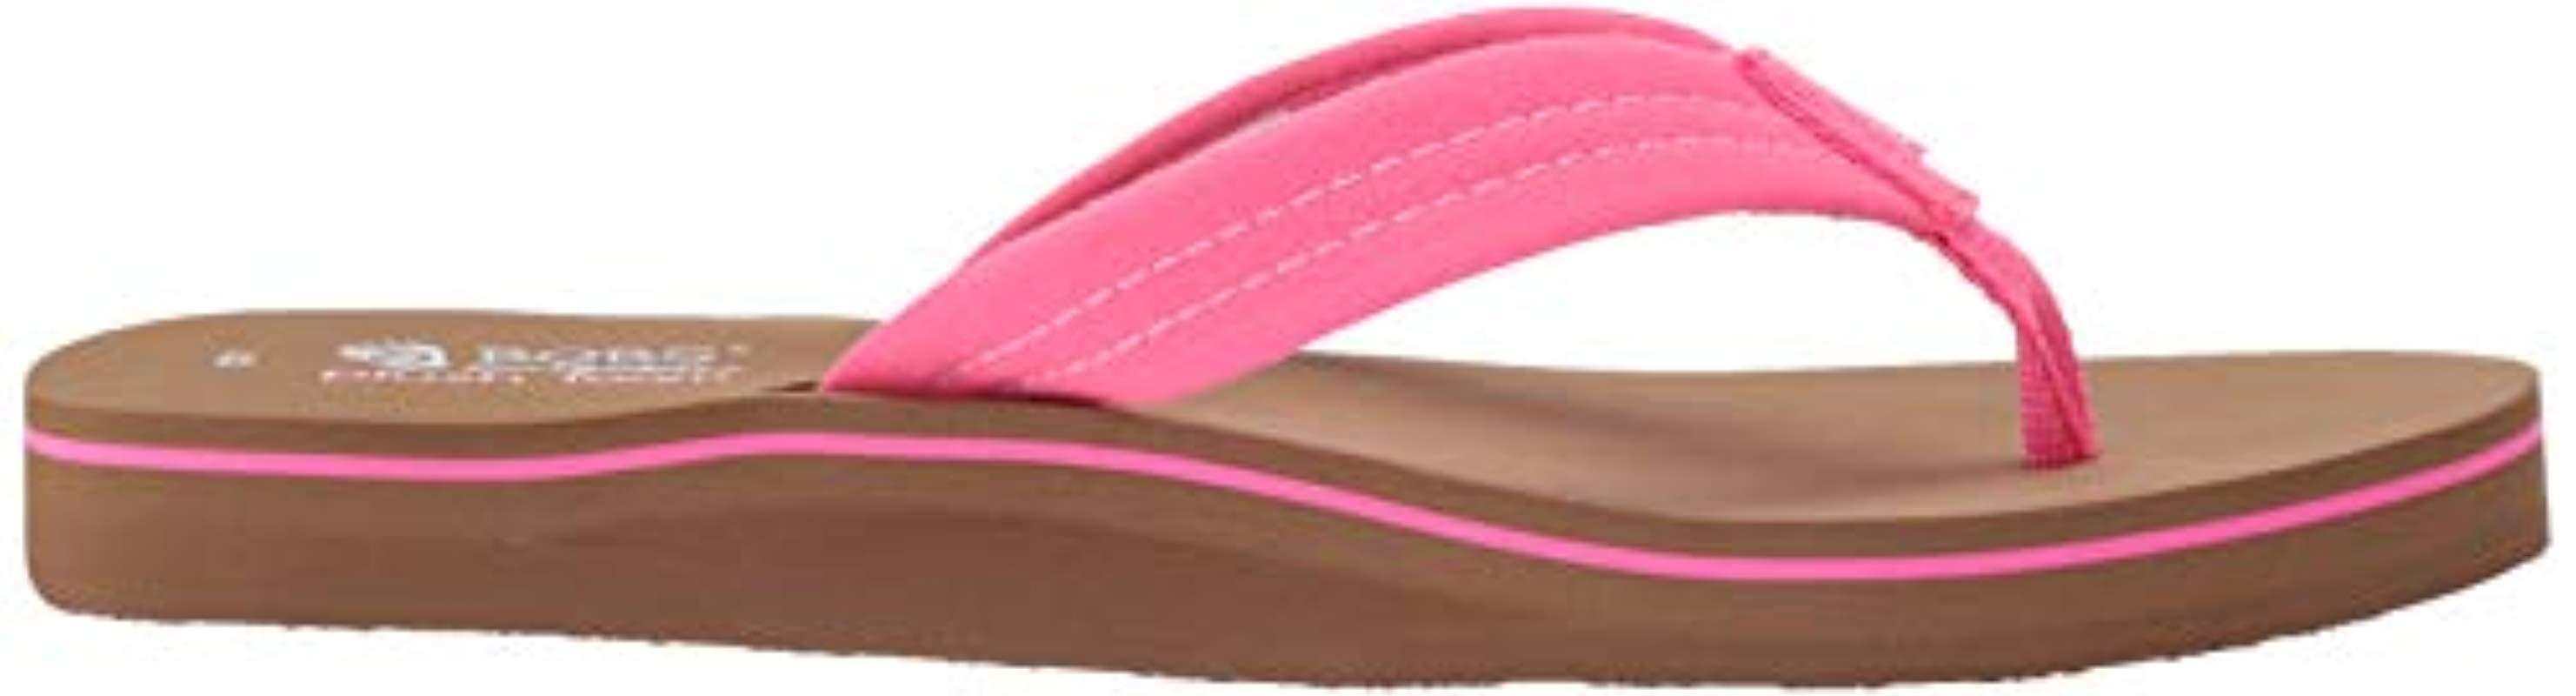 Skechers Synthetic Bobs Sunset Flip-flop in Neon Pink (Pink) - Lyst